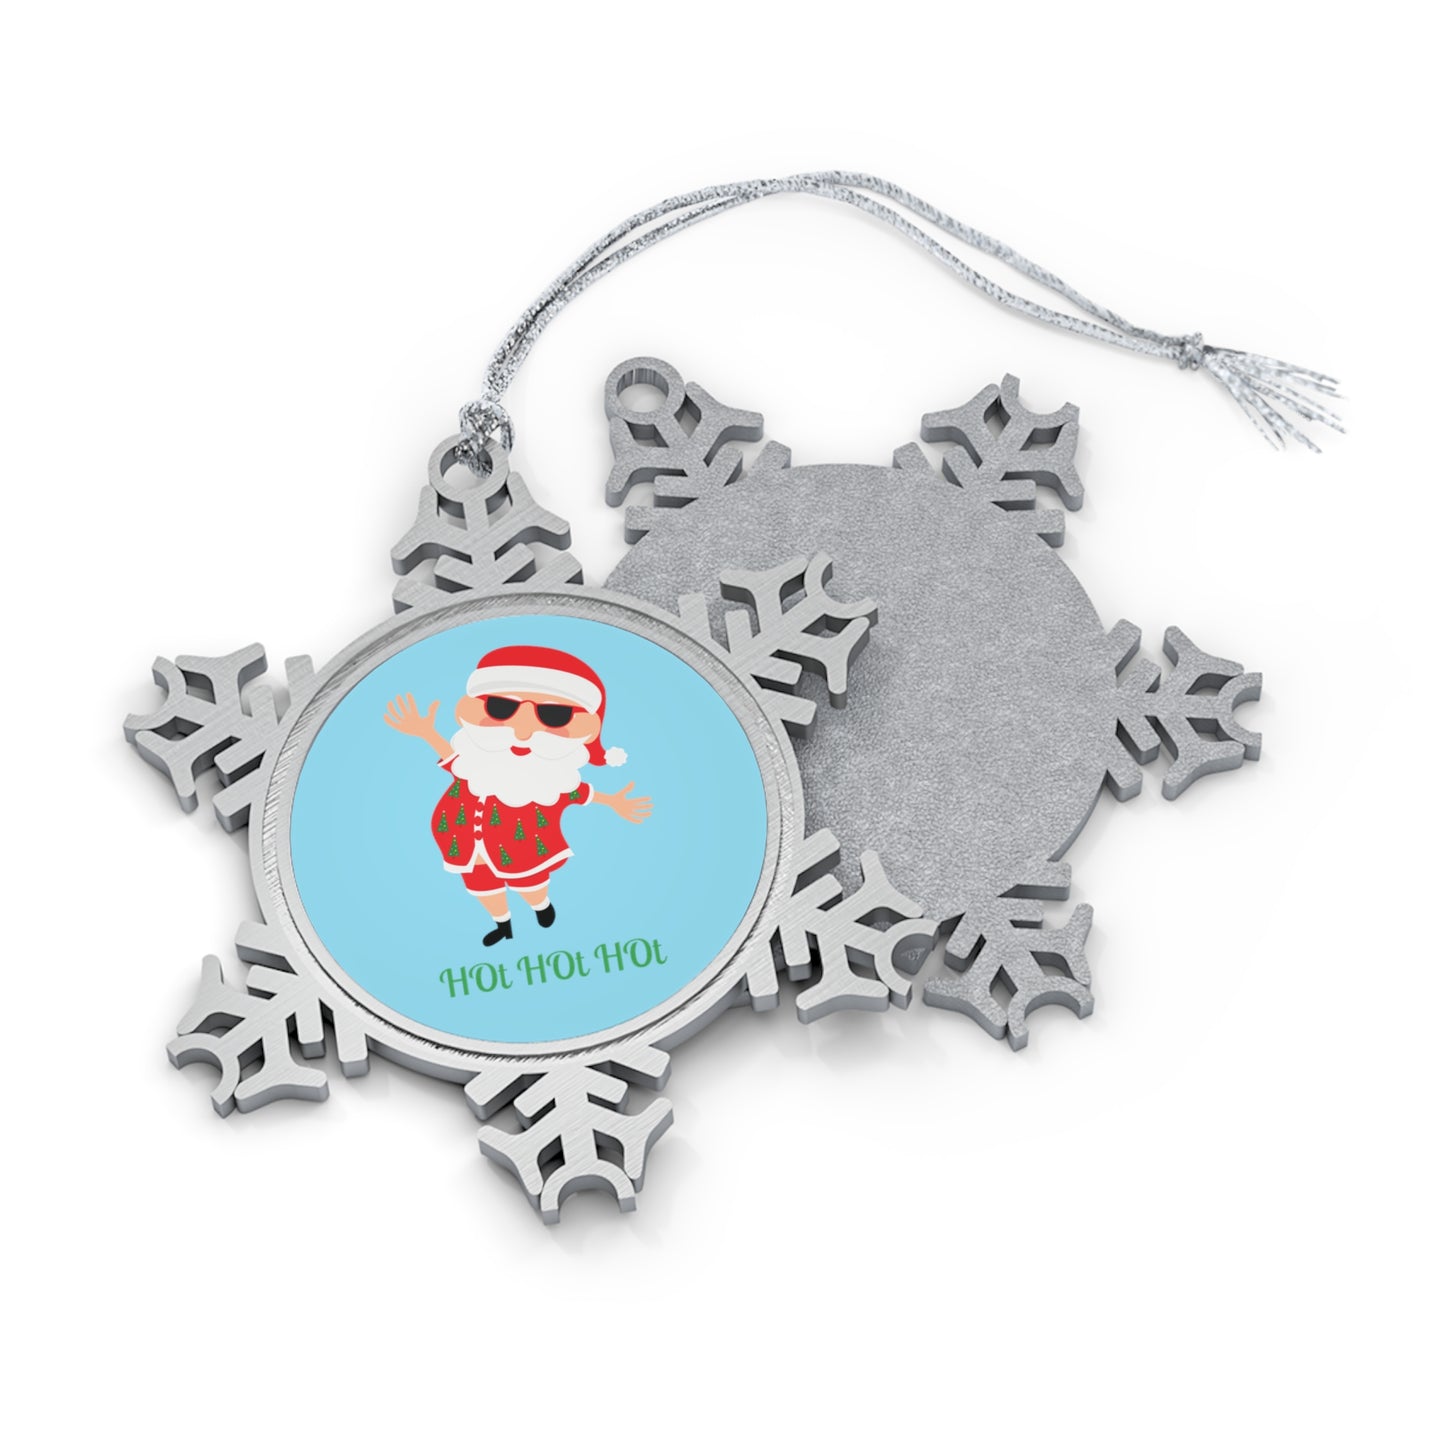 HOt HOt HOt - Pewter Snowflake Ornament Snowflake One Size Christmas Ornament